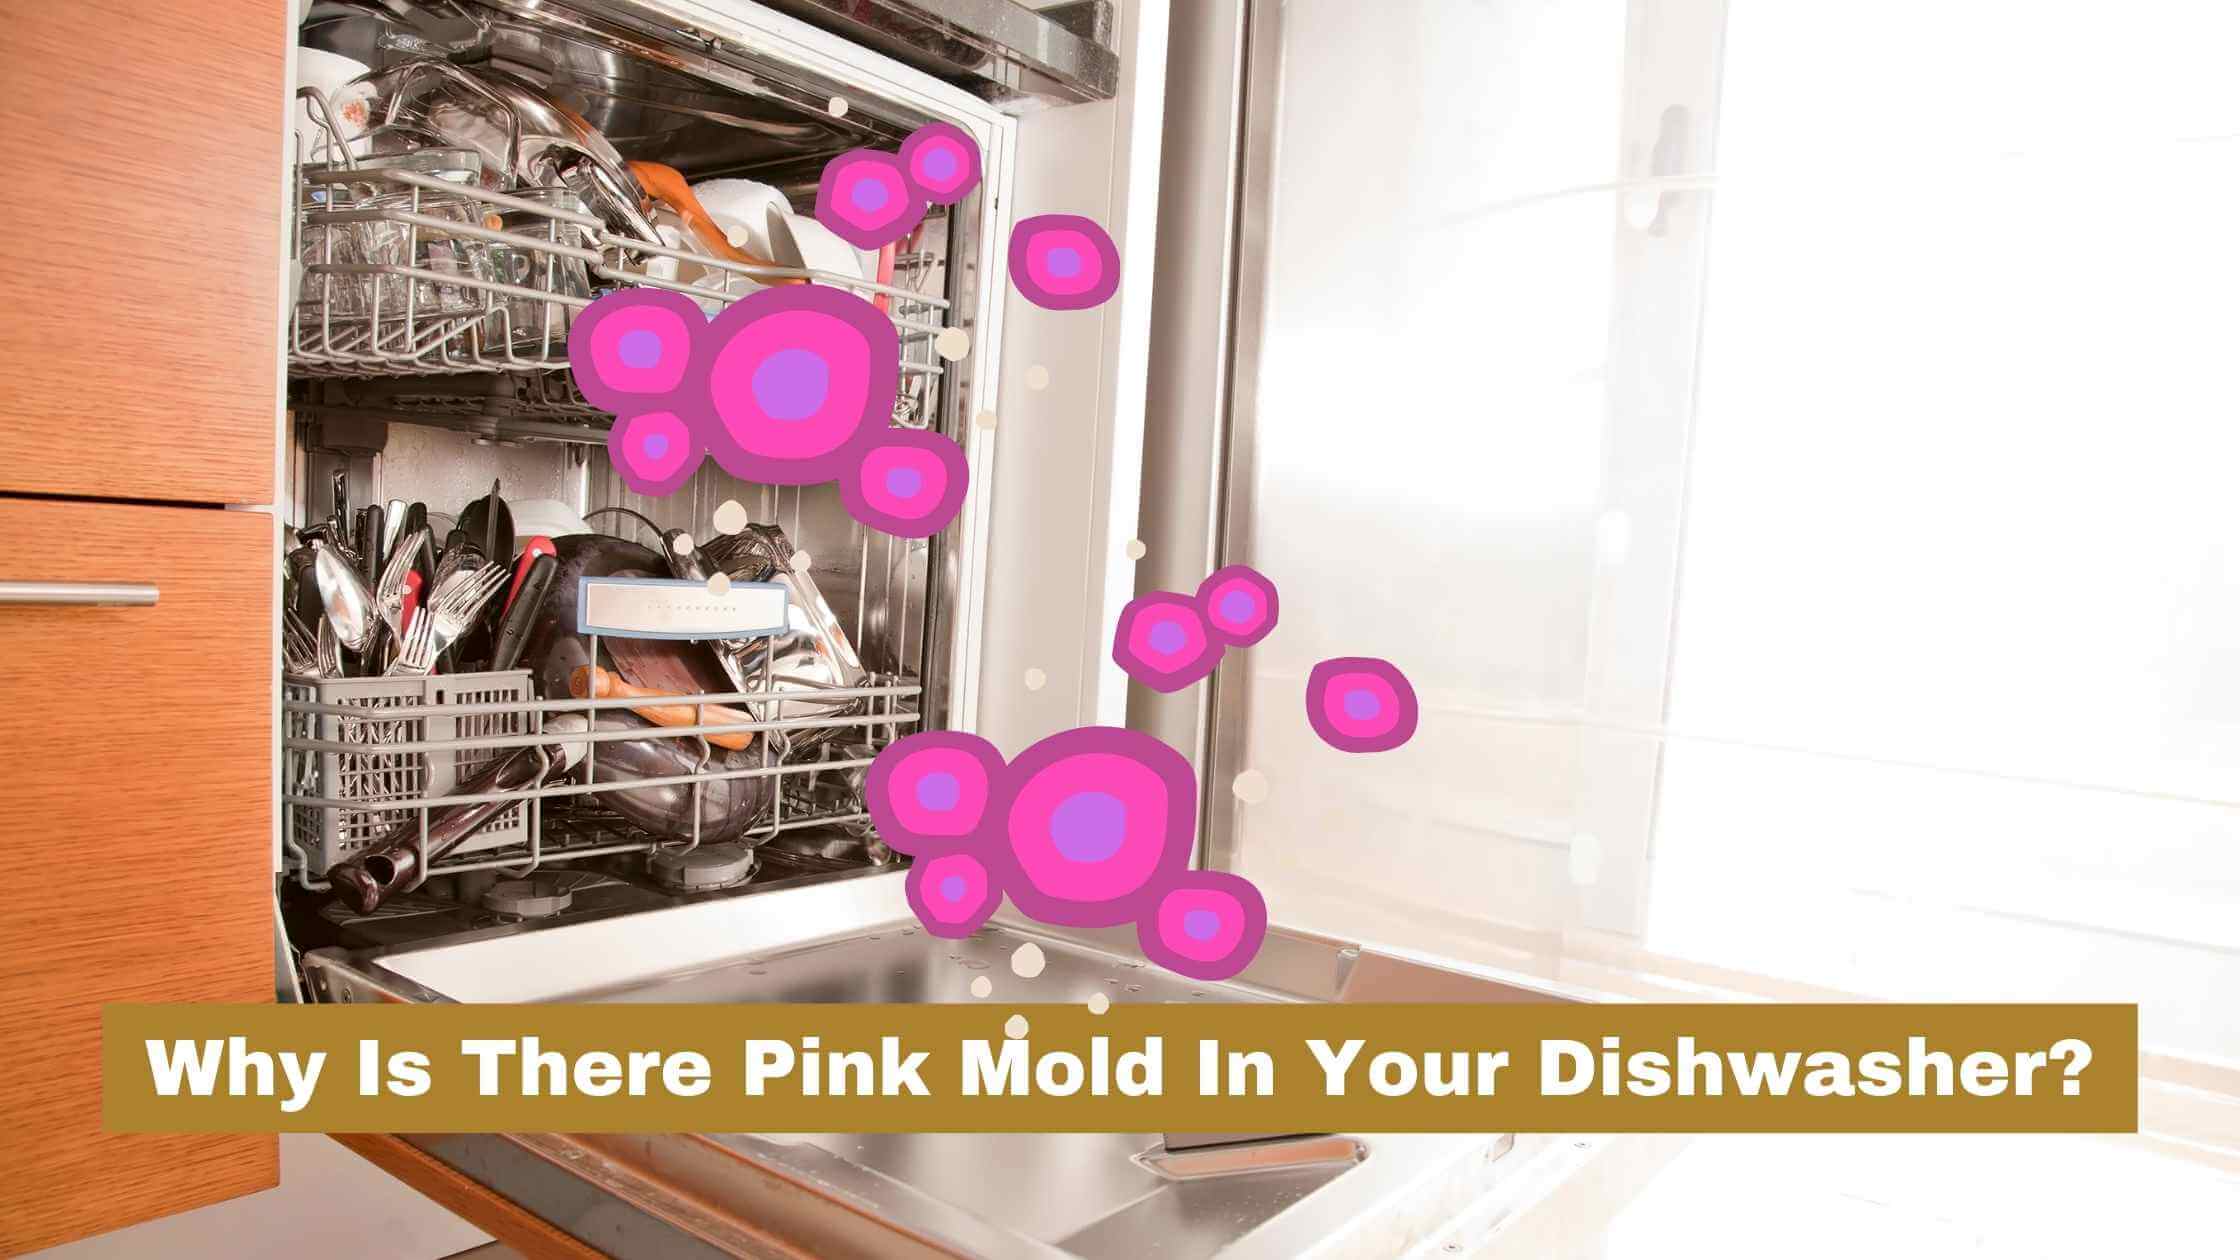 Pink mold in Dishwasher